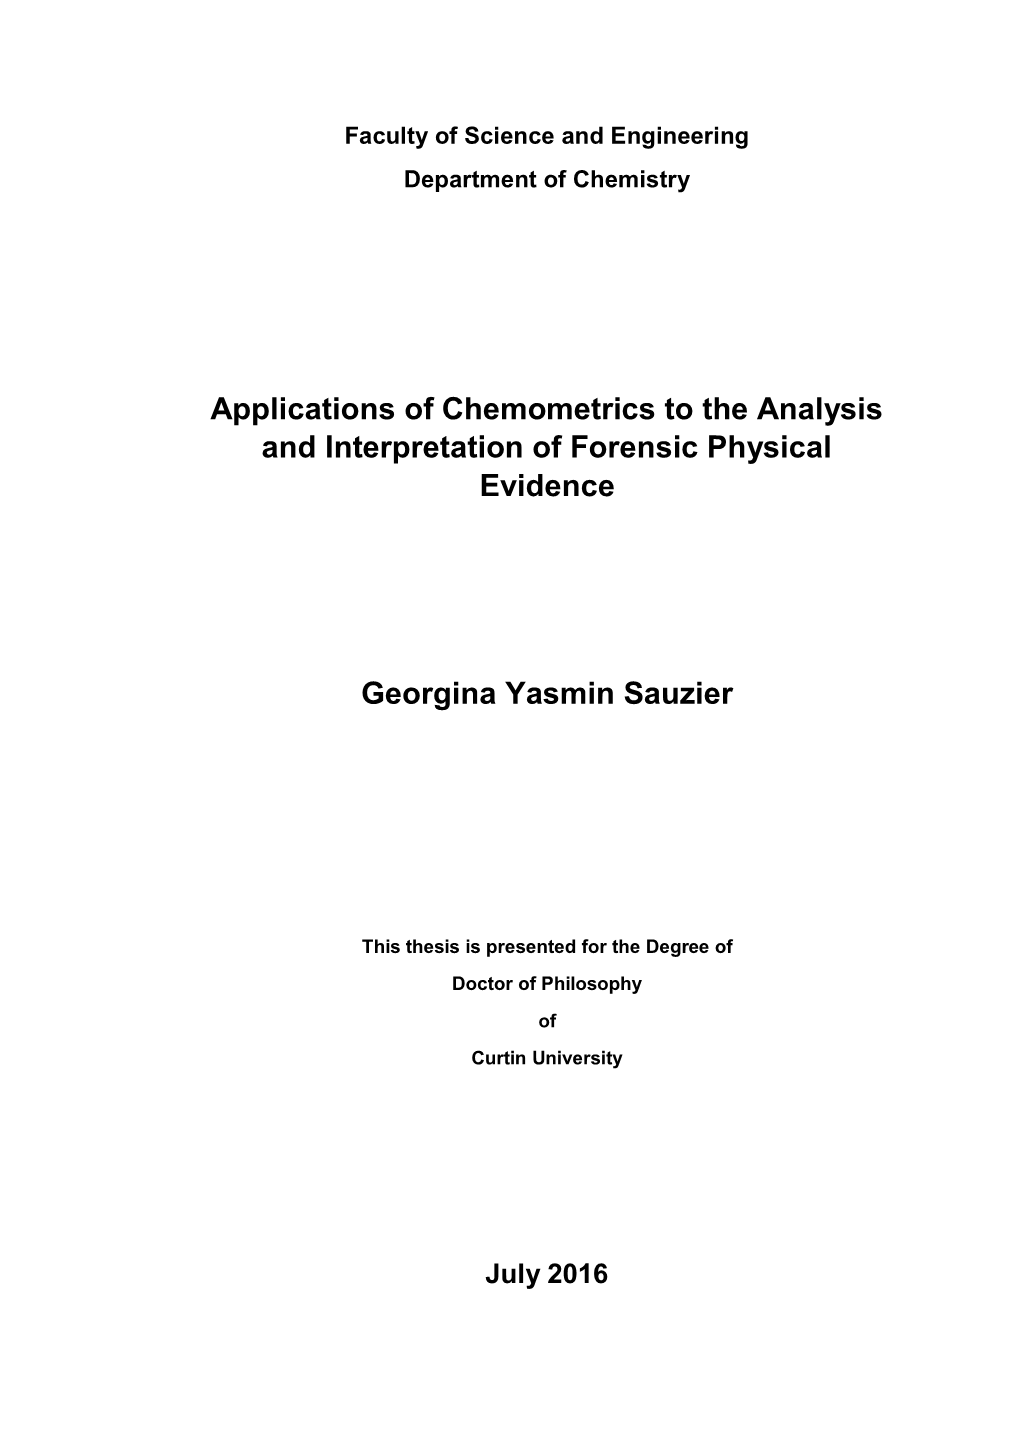 Applications of Chemometrics to the Analysis and Interpretation of Forensic Physical Evidence